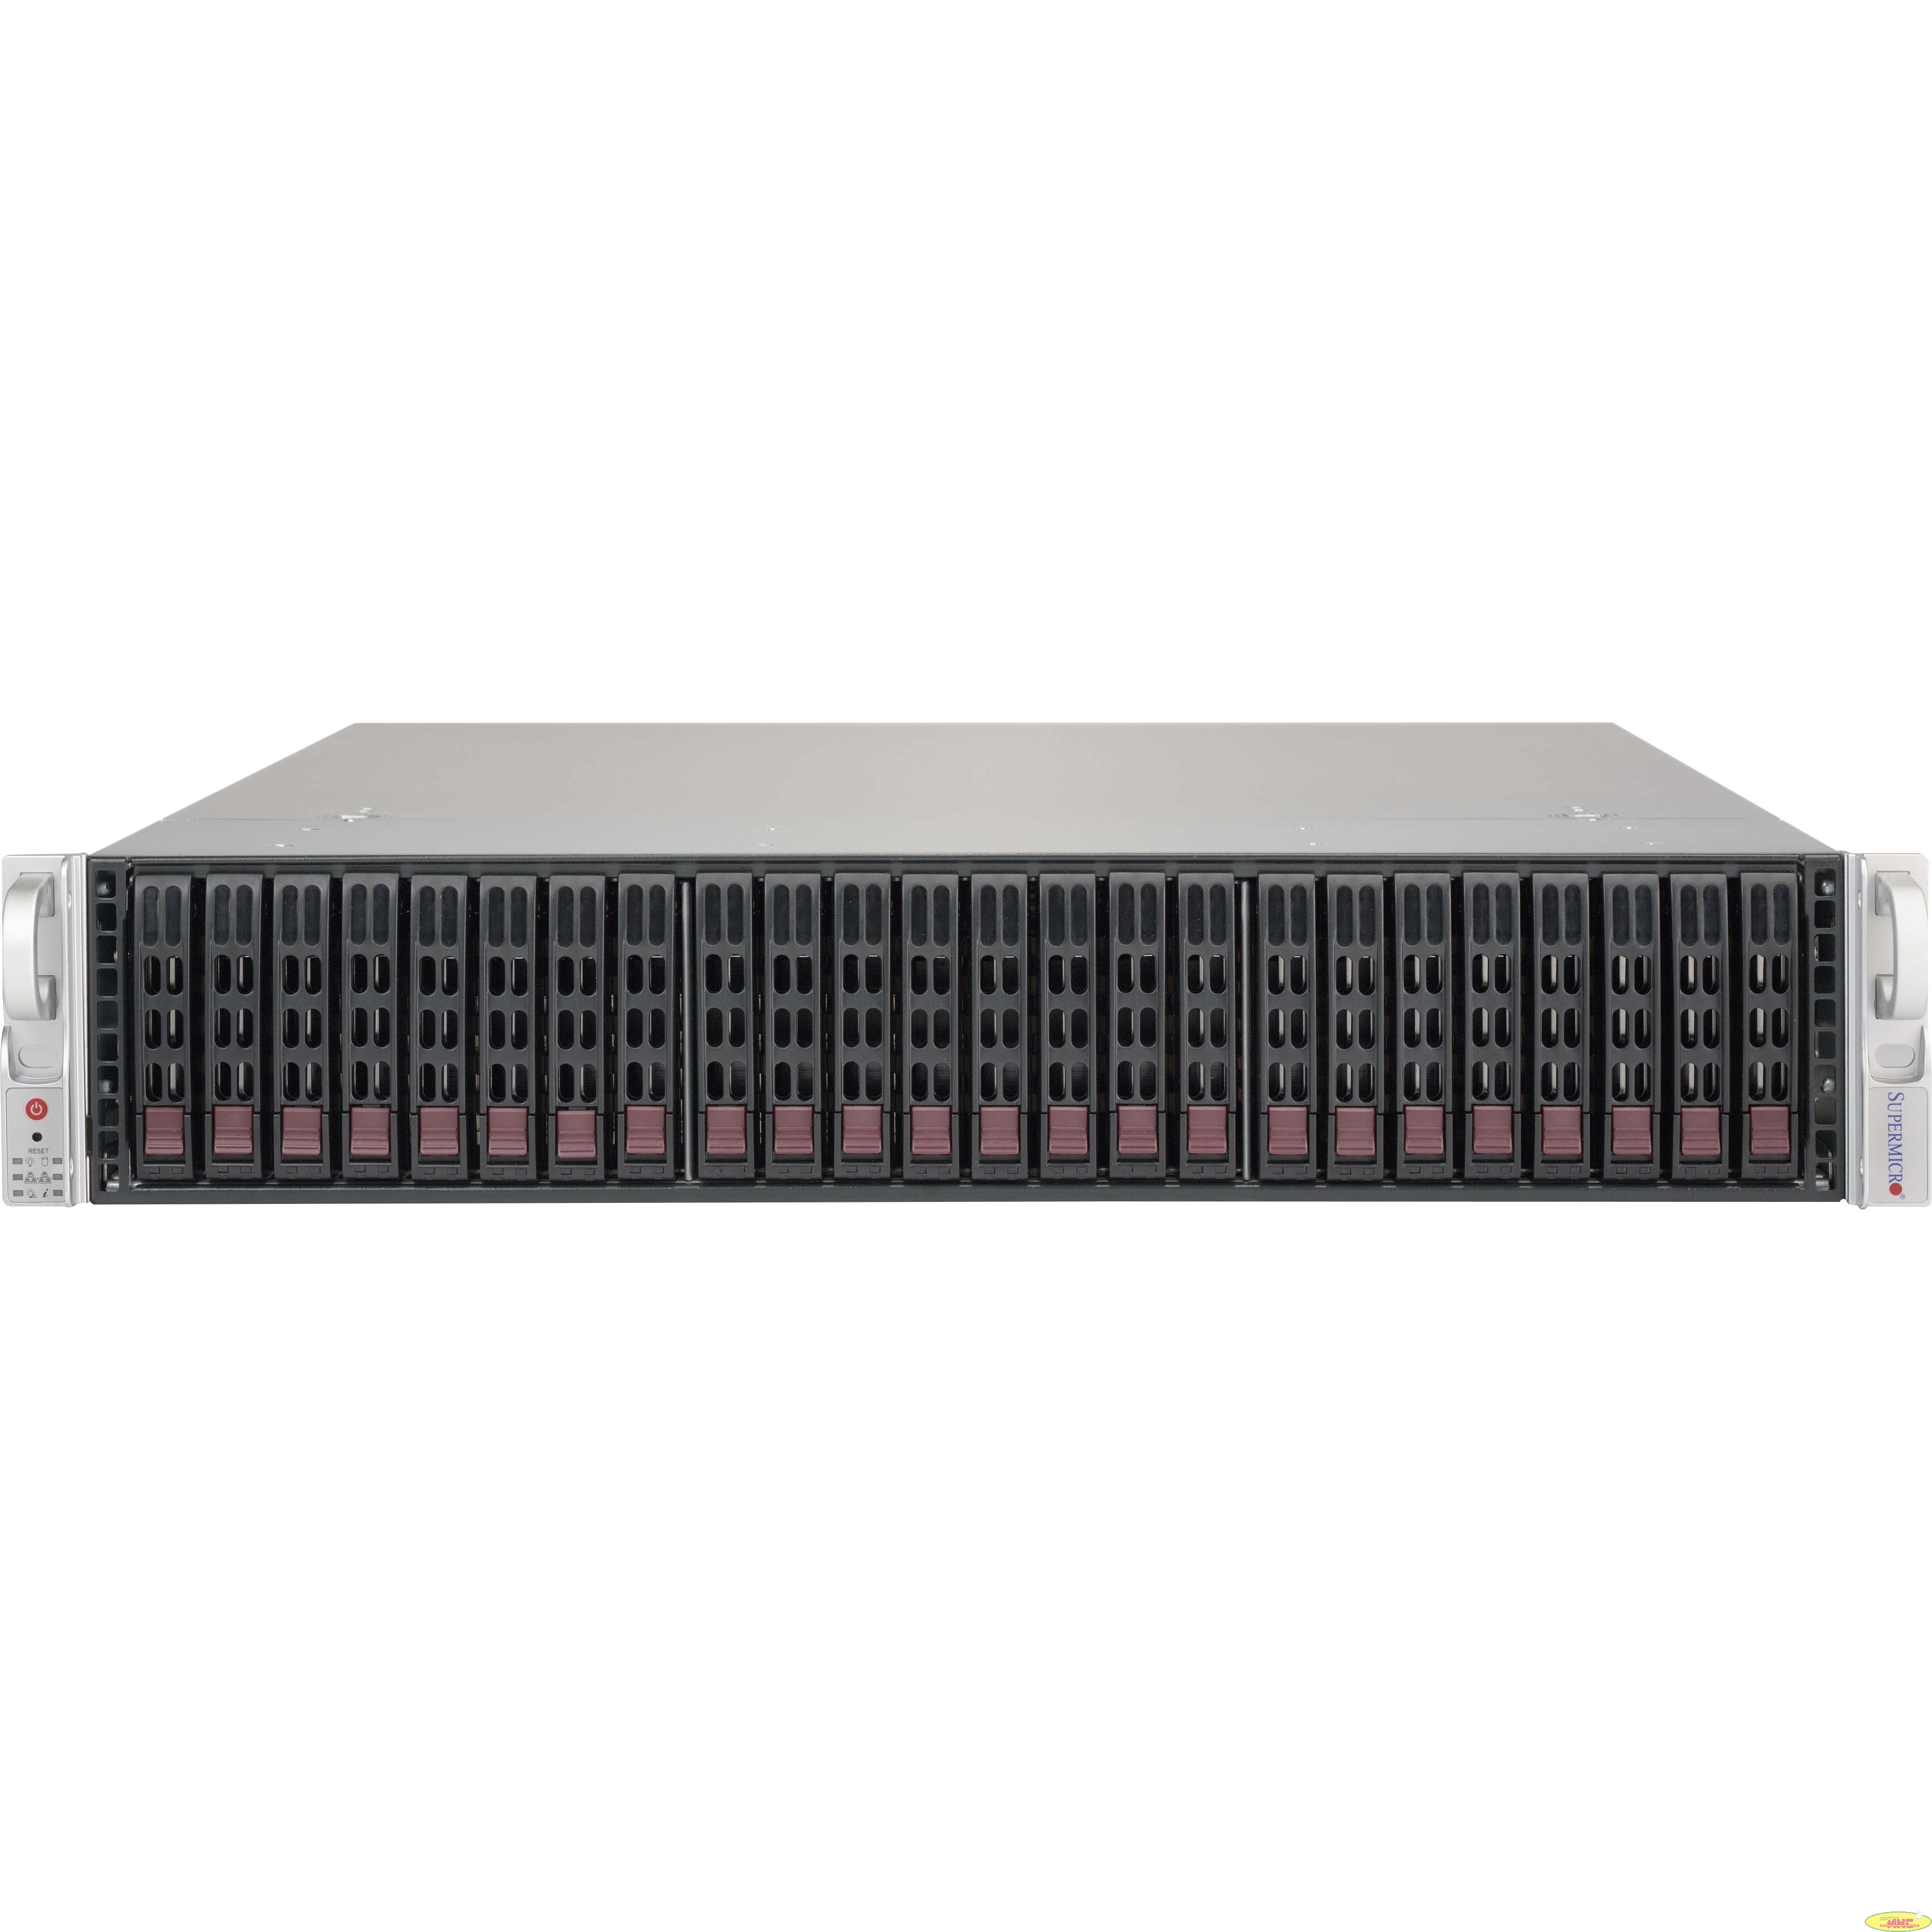 SuperMicro CSE-216BE1C-R609JBOD 2U Storage JBOD Chassis with capacity 24 x 2.5&quot; hot-swappable HDDs bays, Single Expander Backplane Boards support SAS3/2 or SATA3 HDDs with 12Gb/s throughput,